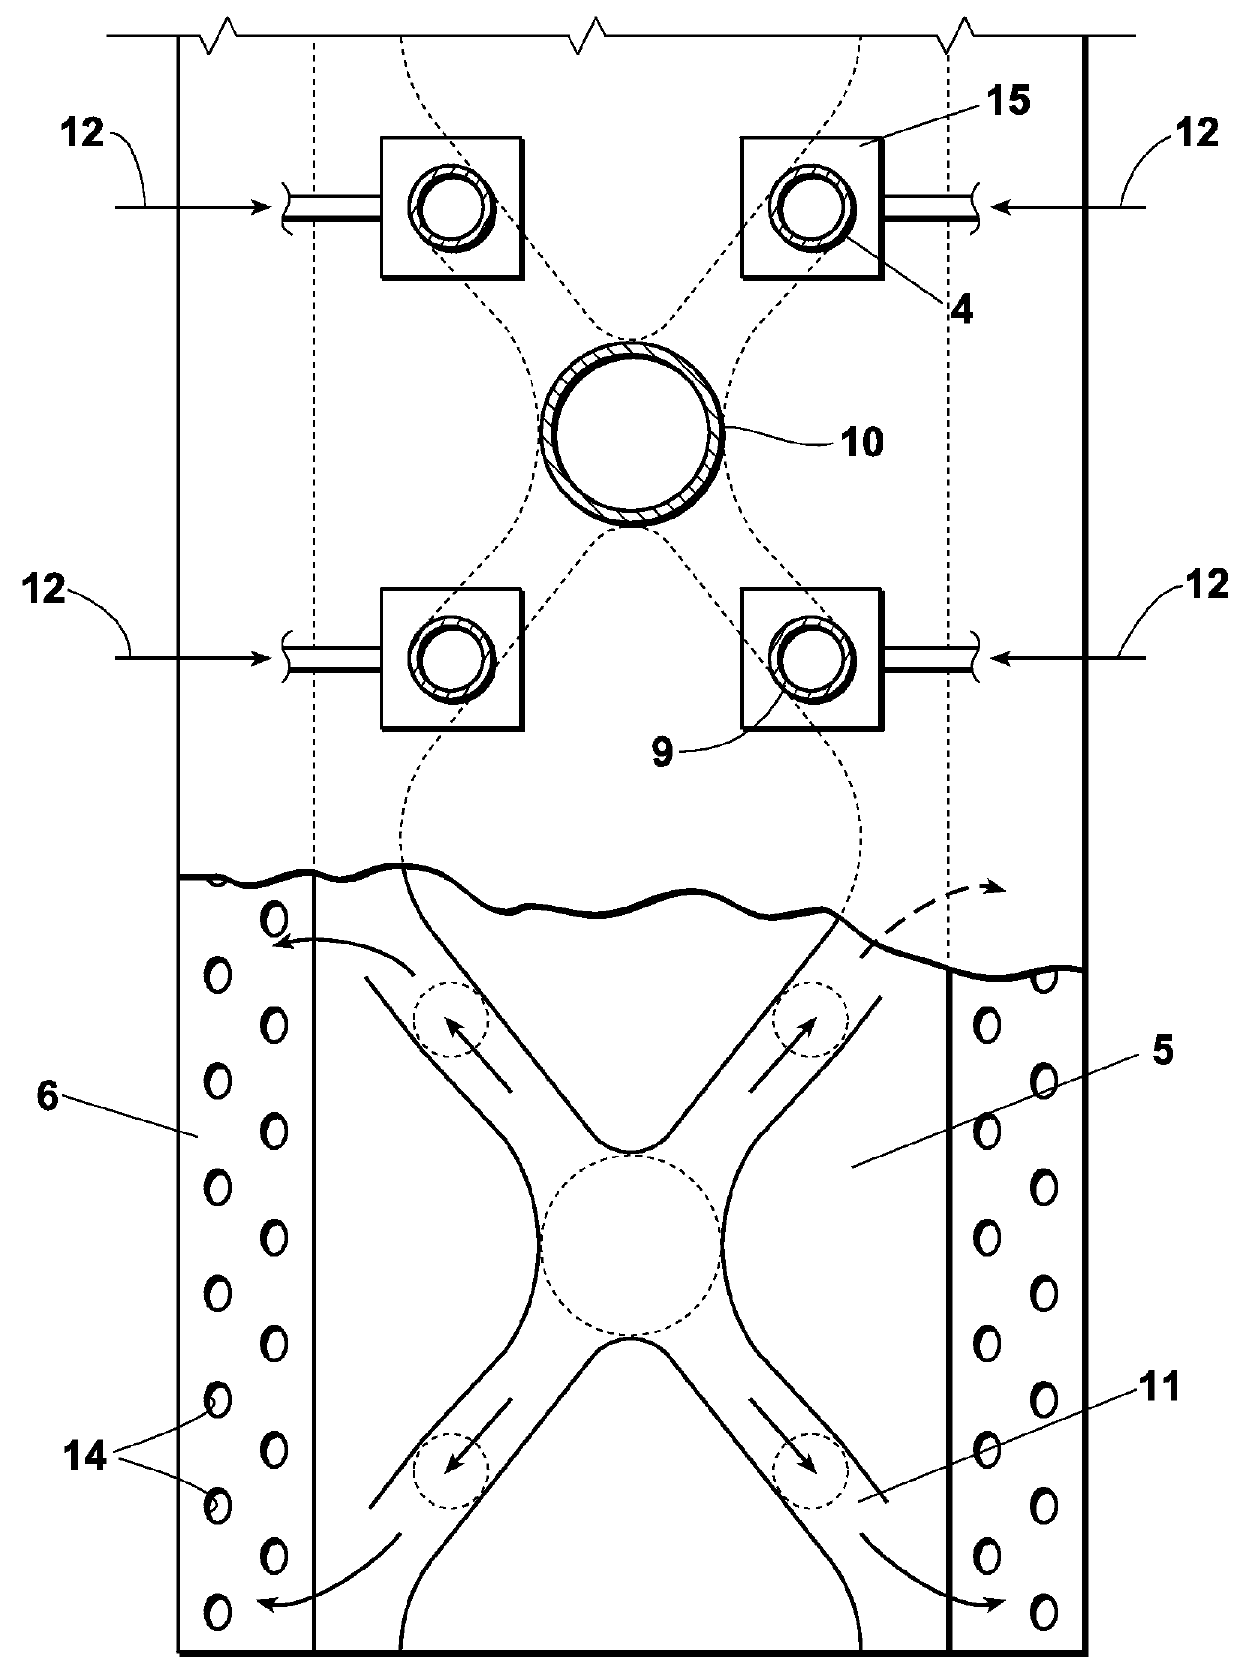 Engine exhaust-driven heating device for use in portable surface drying equipment